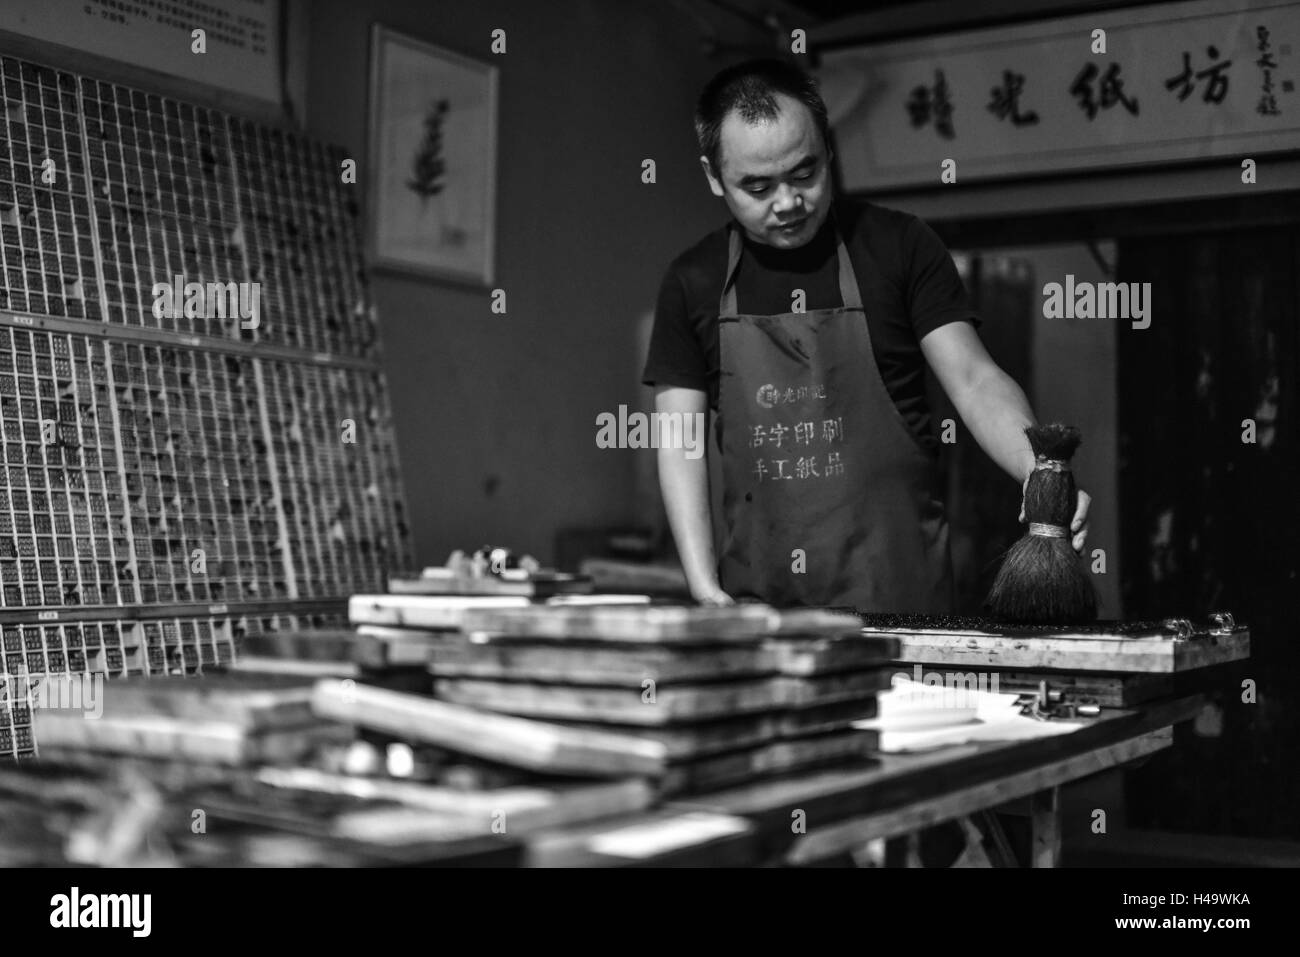 Qingdao, Qingdao, China. 14th Oct, 2016. Binzhou, CHINA-October 13 2016: (EDITORIAL USE ONLY.CHINA OUT) Ruan Tongmin works in his studio of movable type printing in Qingdao, east China's Shandong Province, October 14th, 2016. Ruan Tongmin, born in a family of printing, is fond of studying on the industry of printing. He has collected hundreds of various printing machines and established a studio specializing on movable type printing, aiming to revitalize Chinese traditional culture of movable type printing. Movable type is the system and technology of printing and typography that uses movab Stock Photo